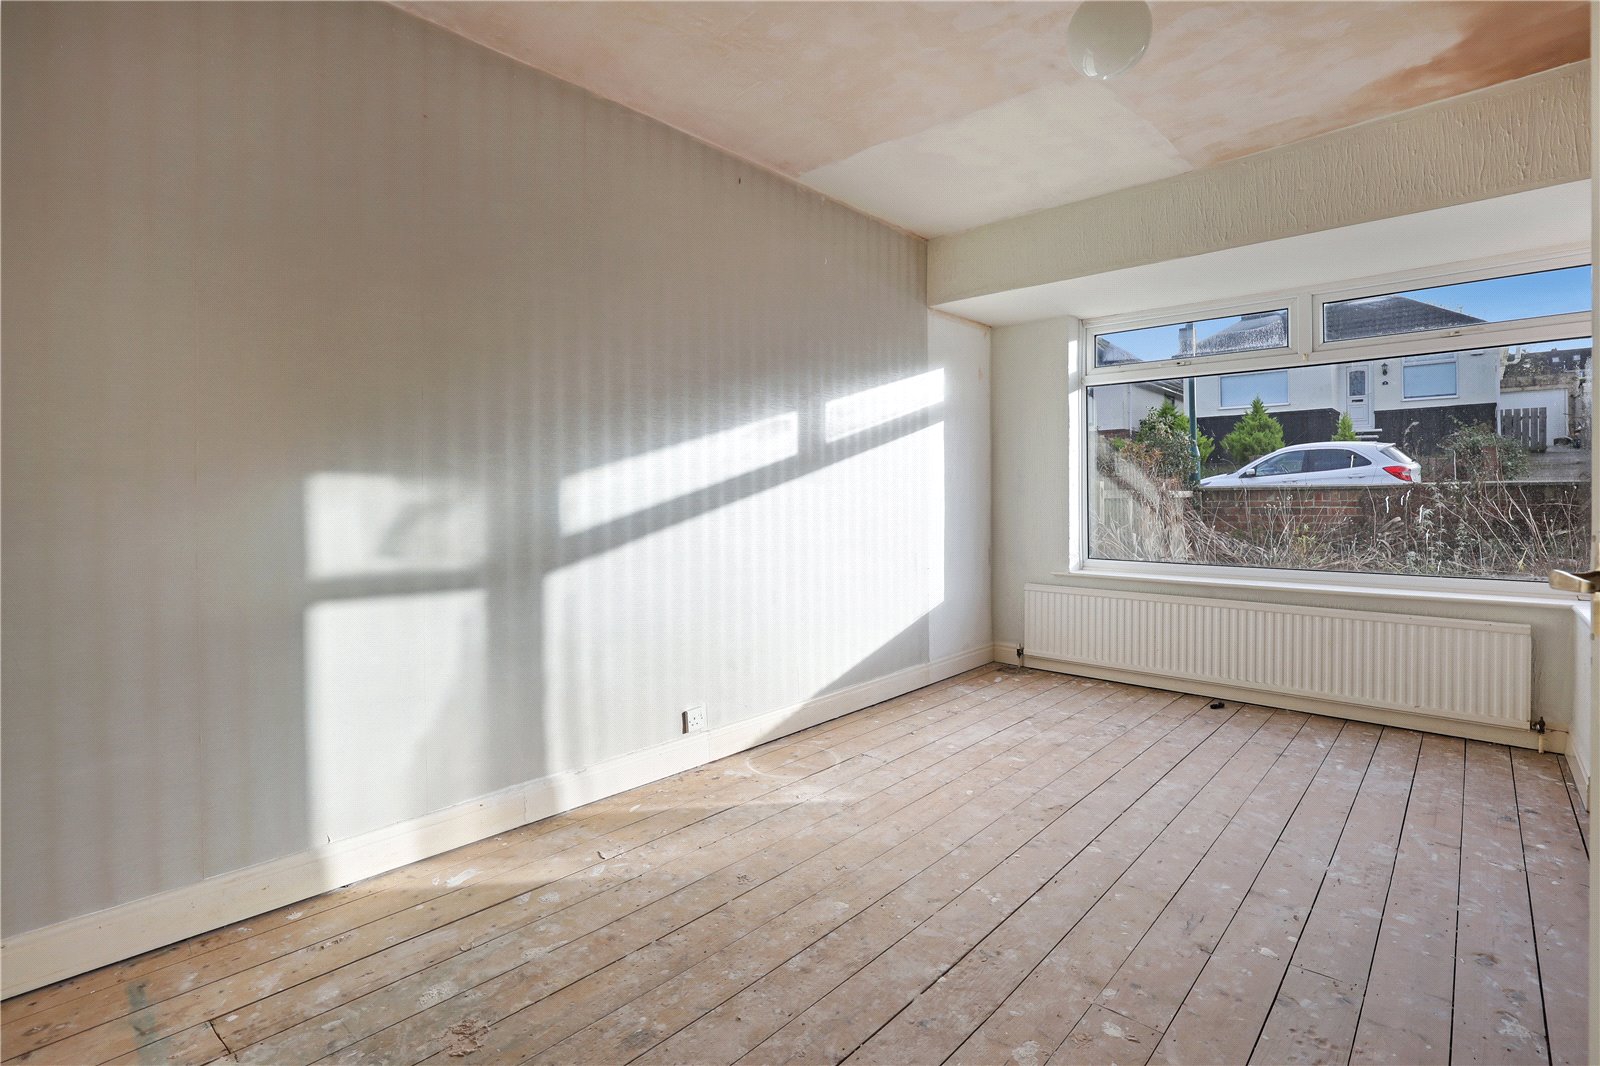 2 bed bungalow for sale  - Property Image 3